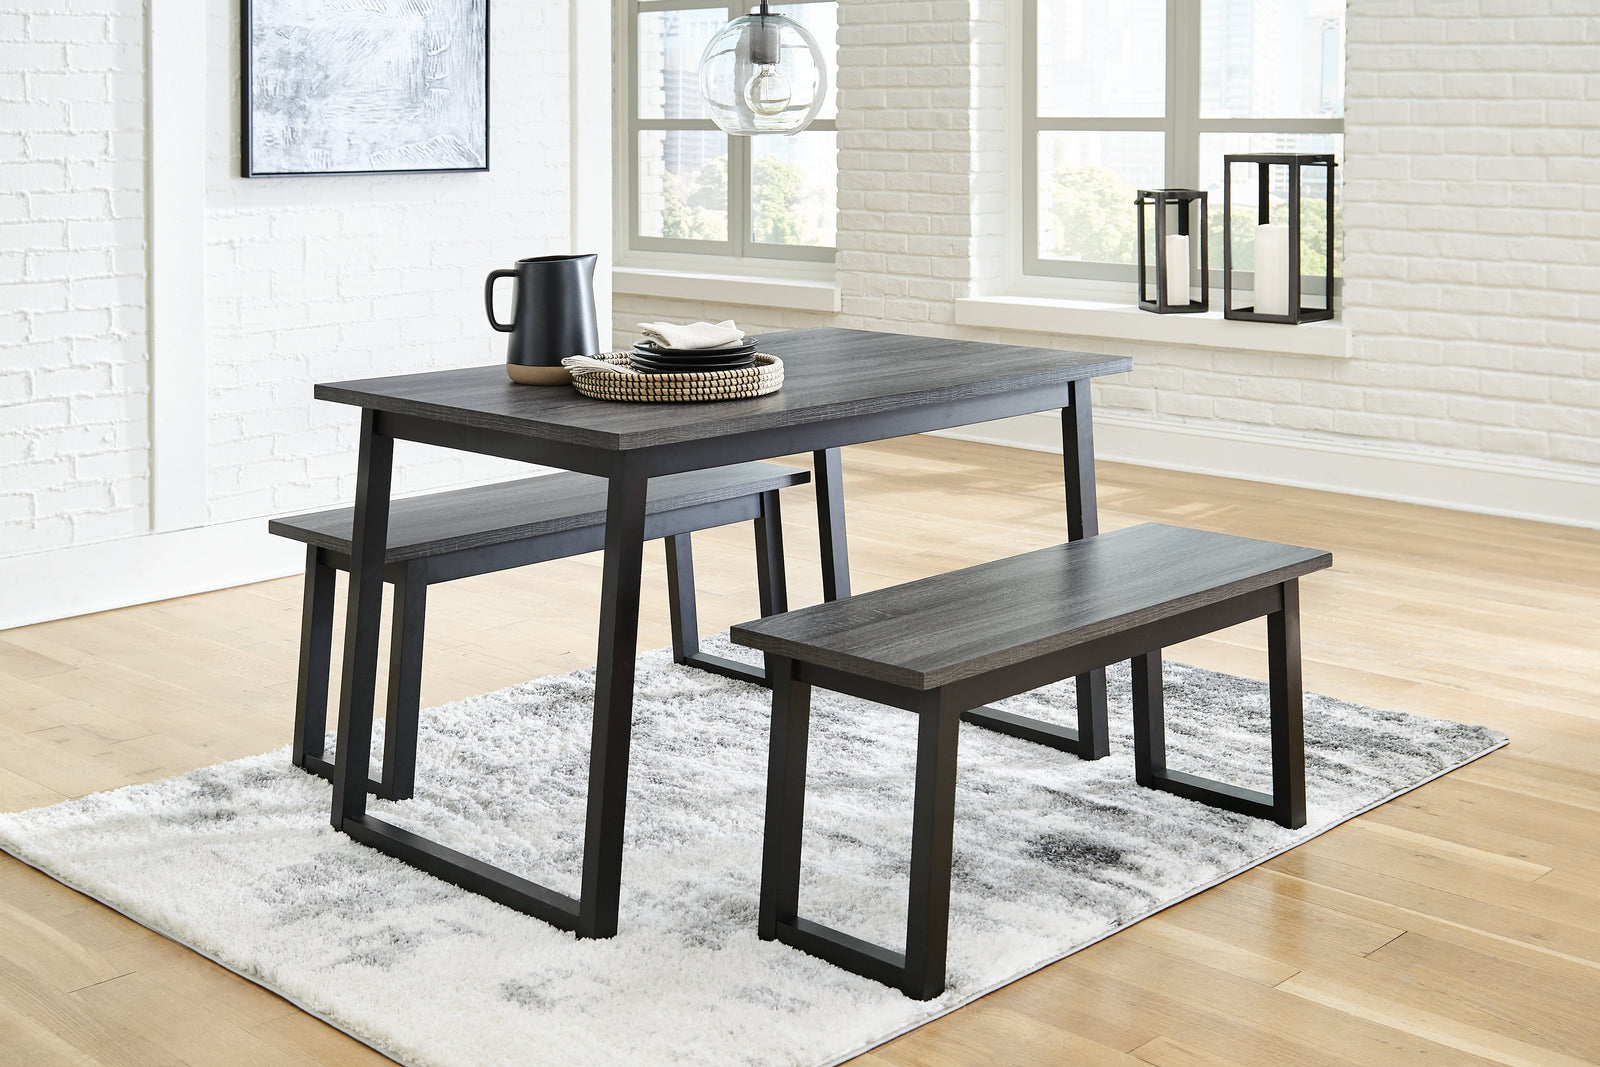 Garvine Black/gray Dining Table And Benches (Set Of 3)